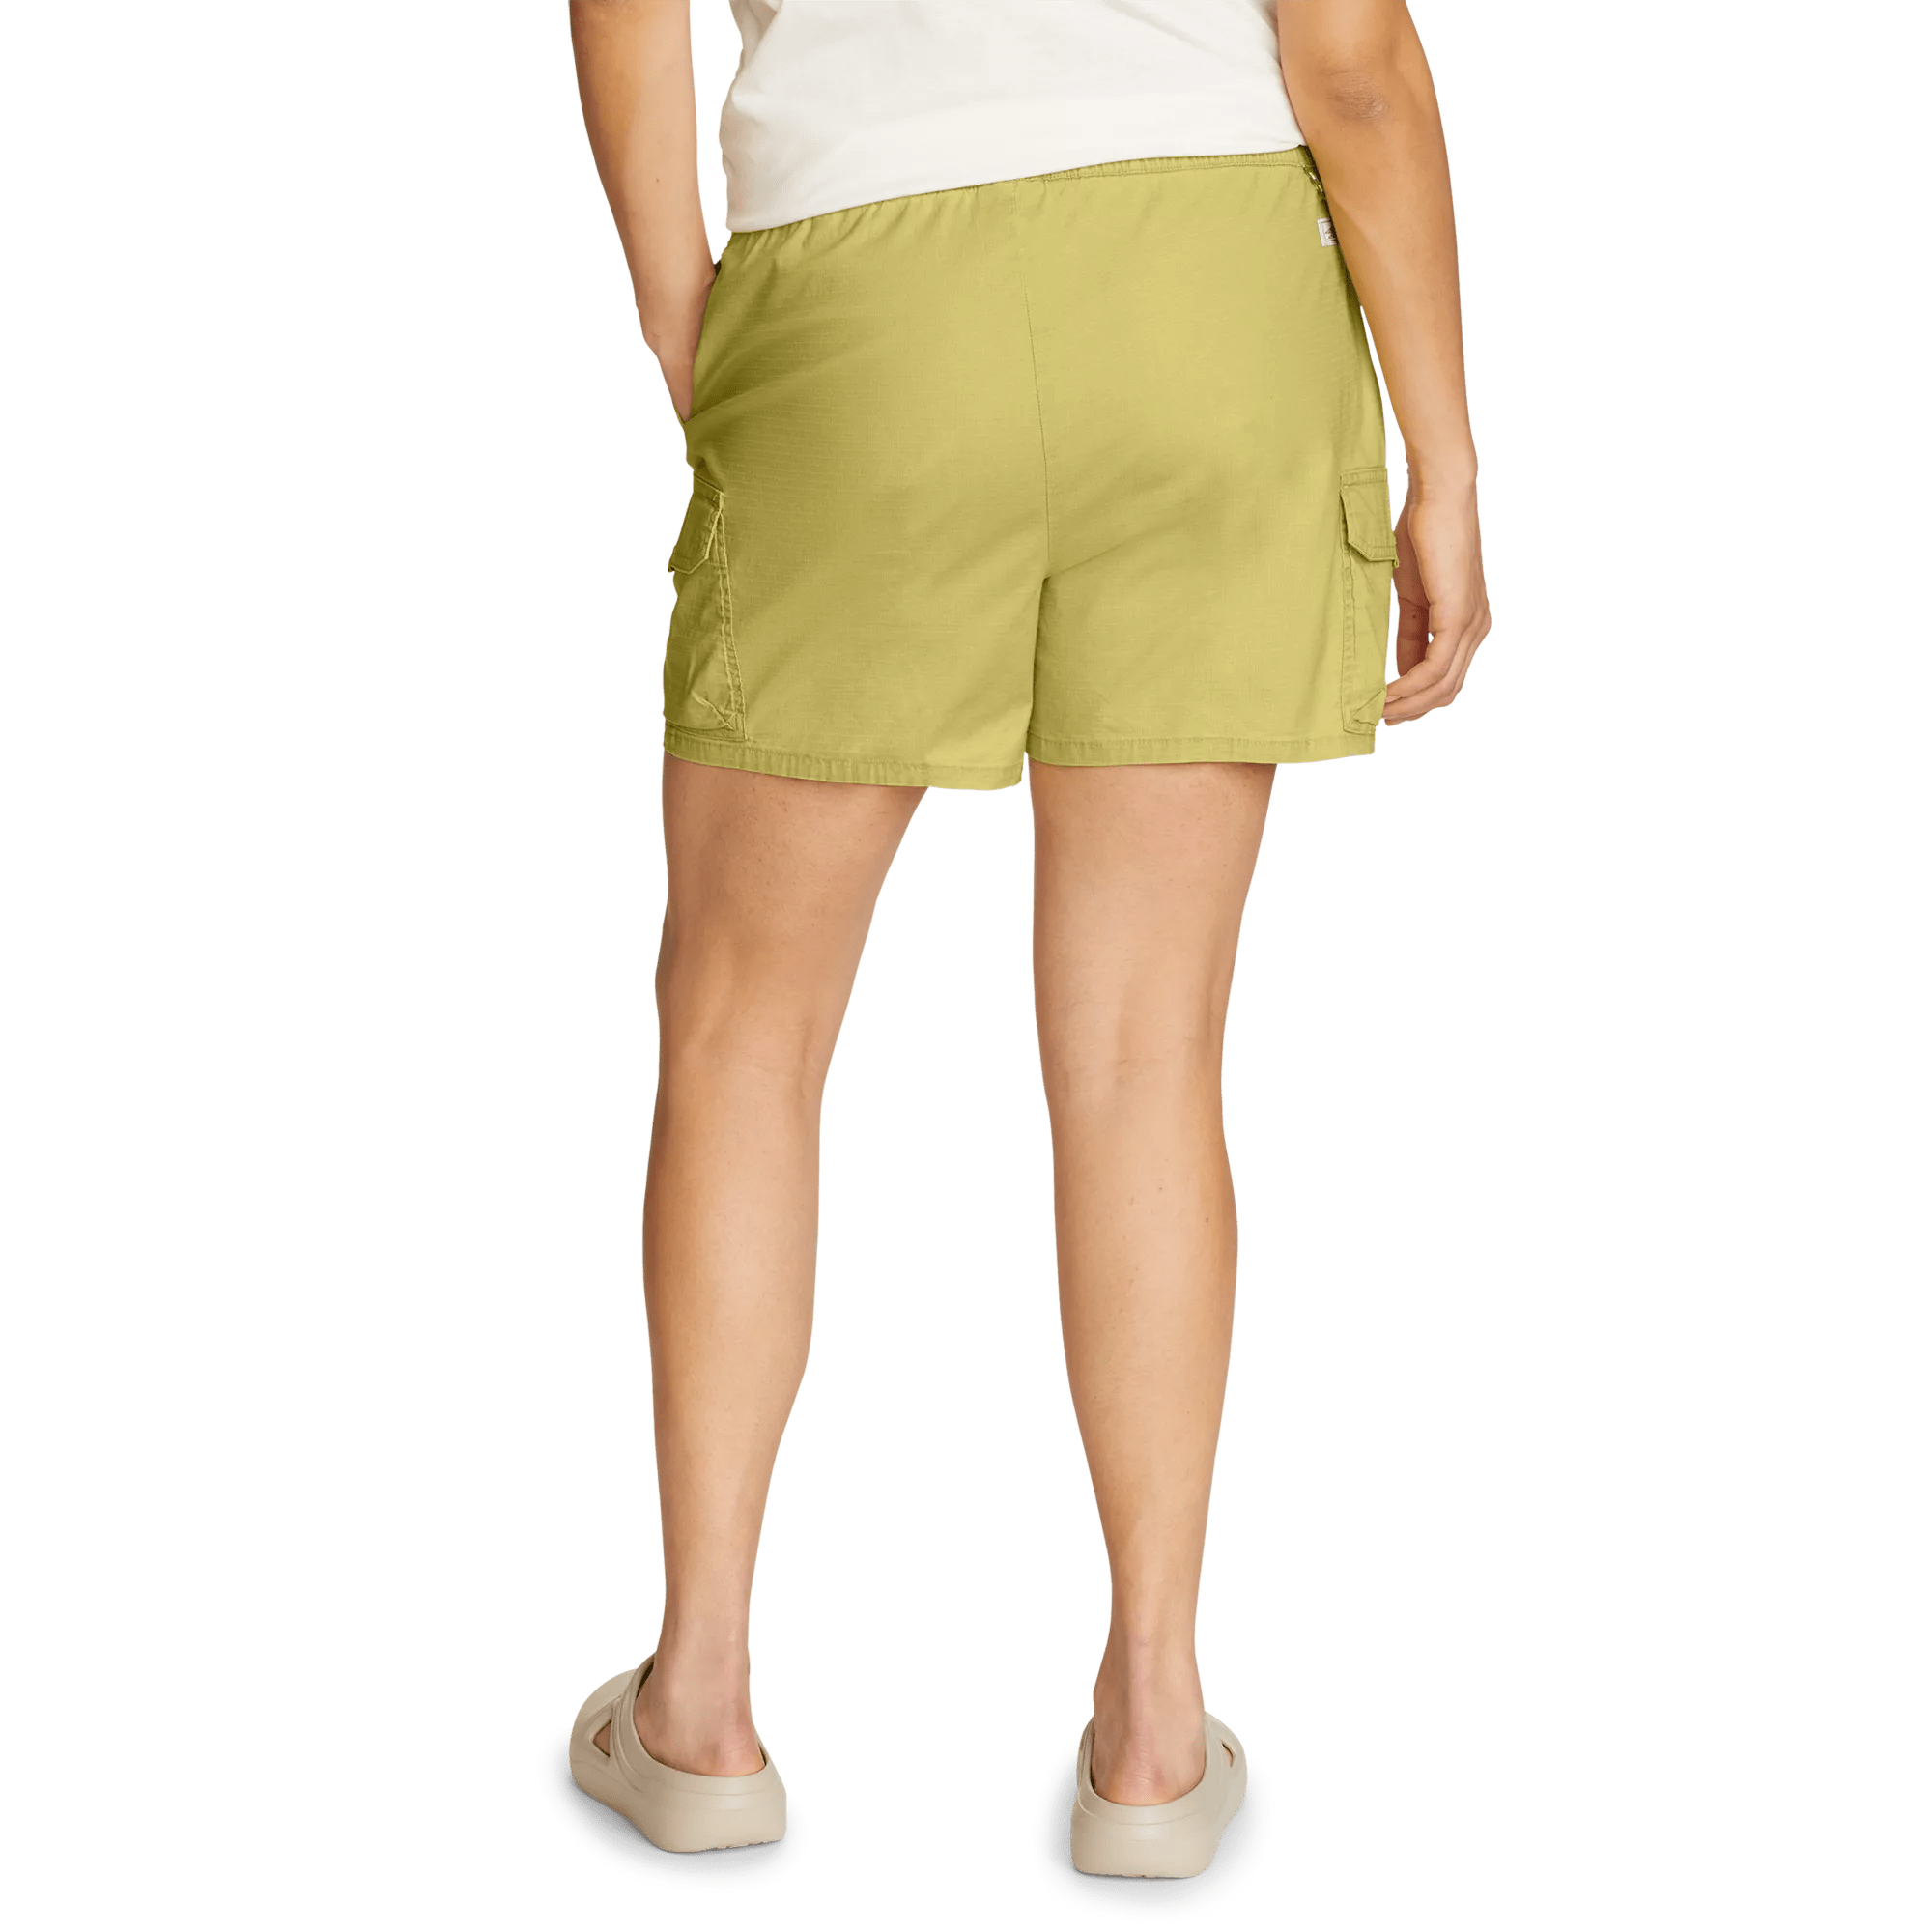 Top Out Ripstop Shorts